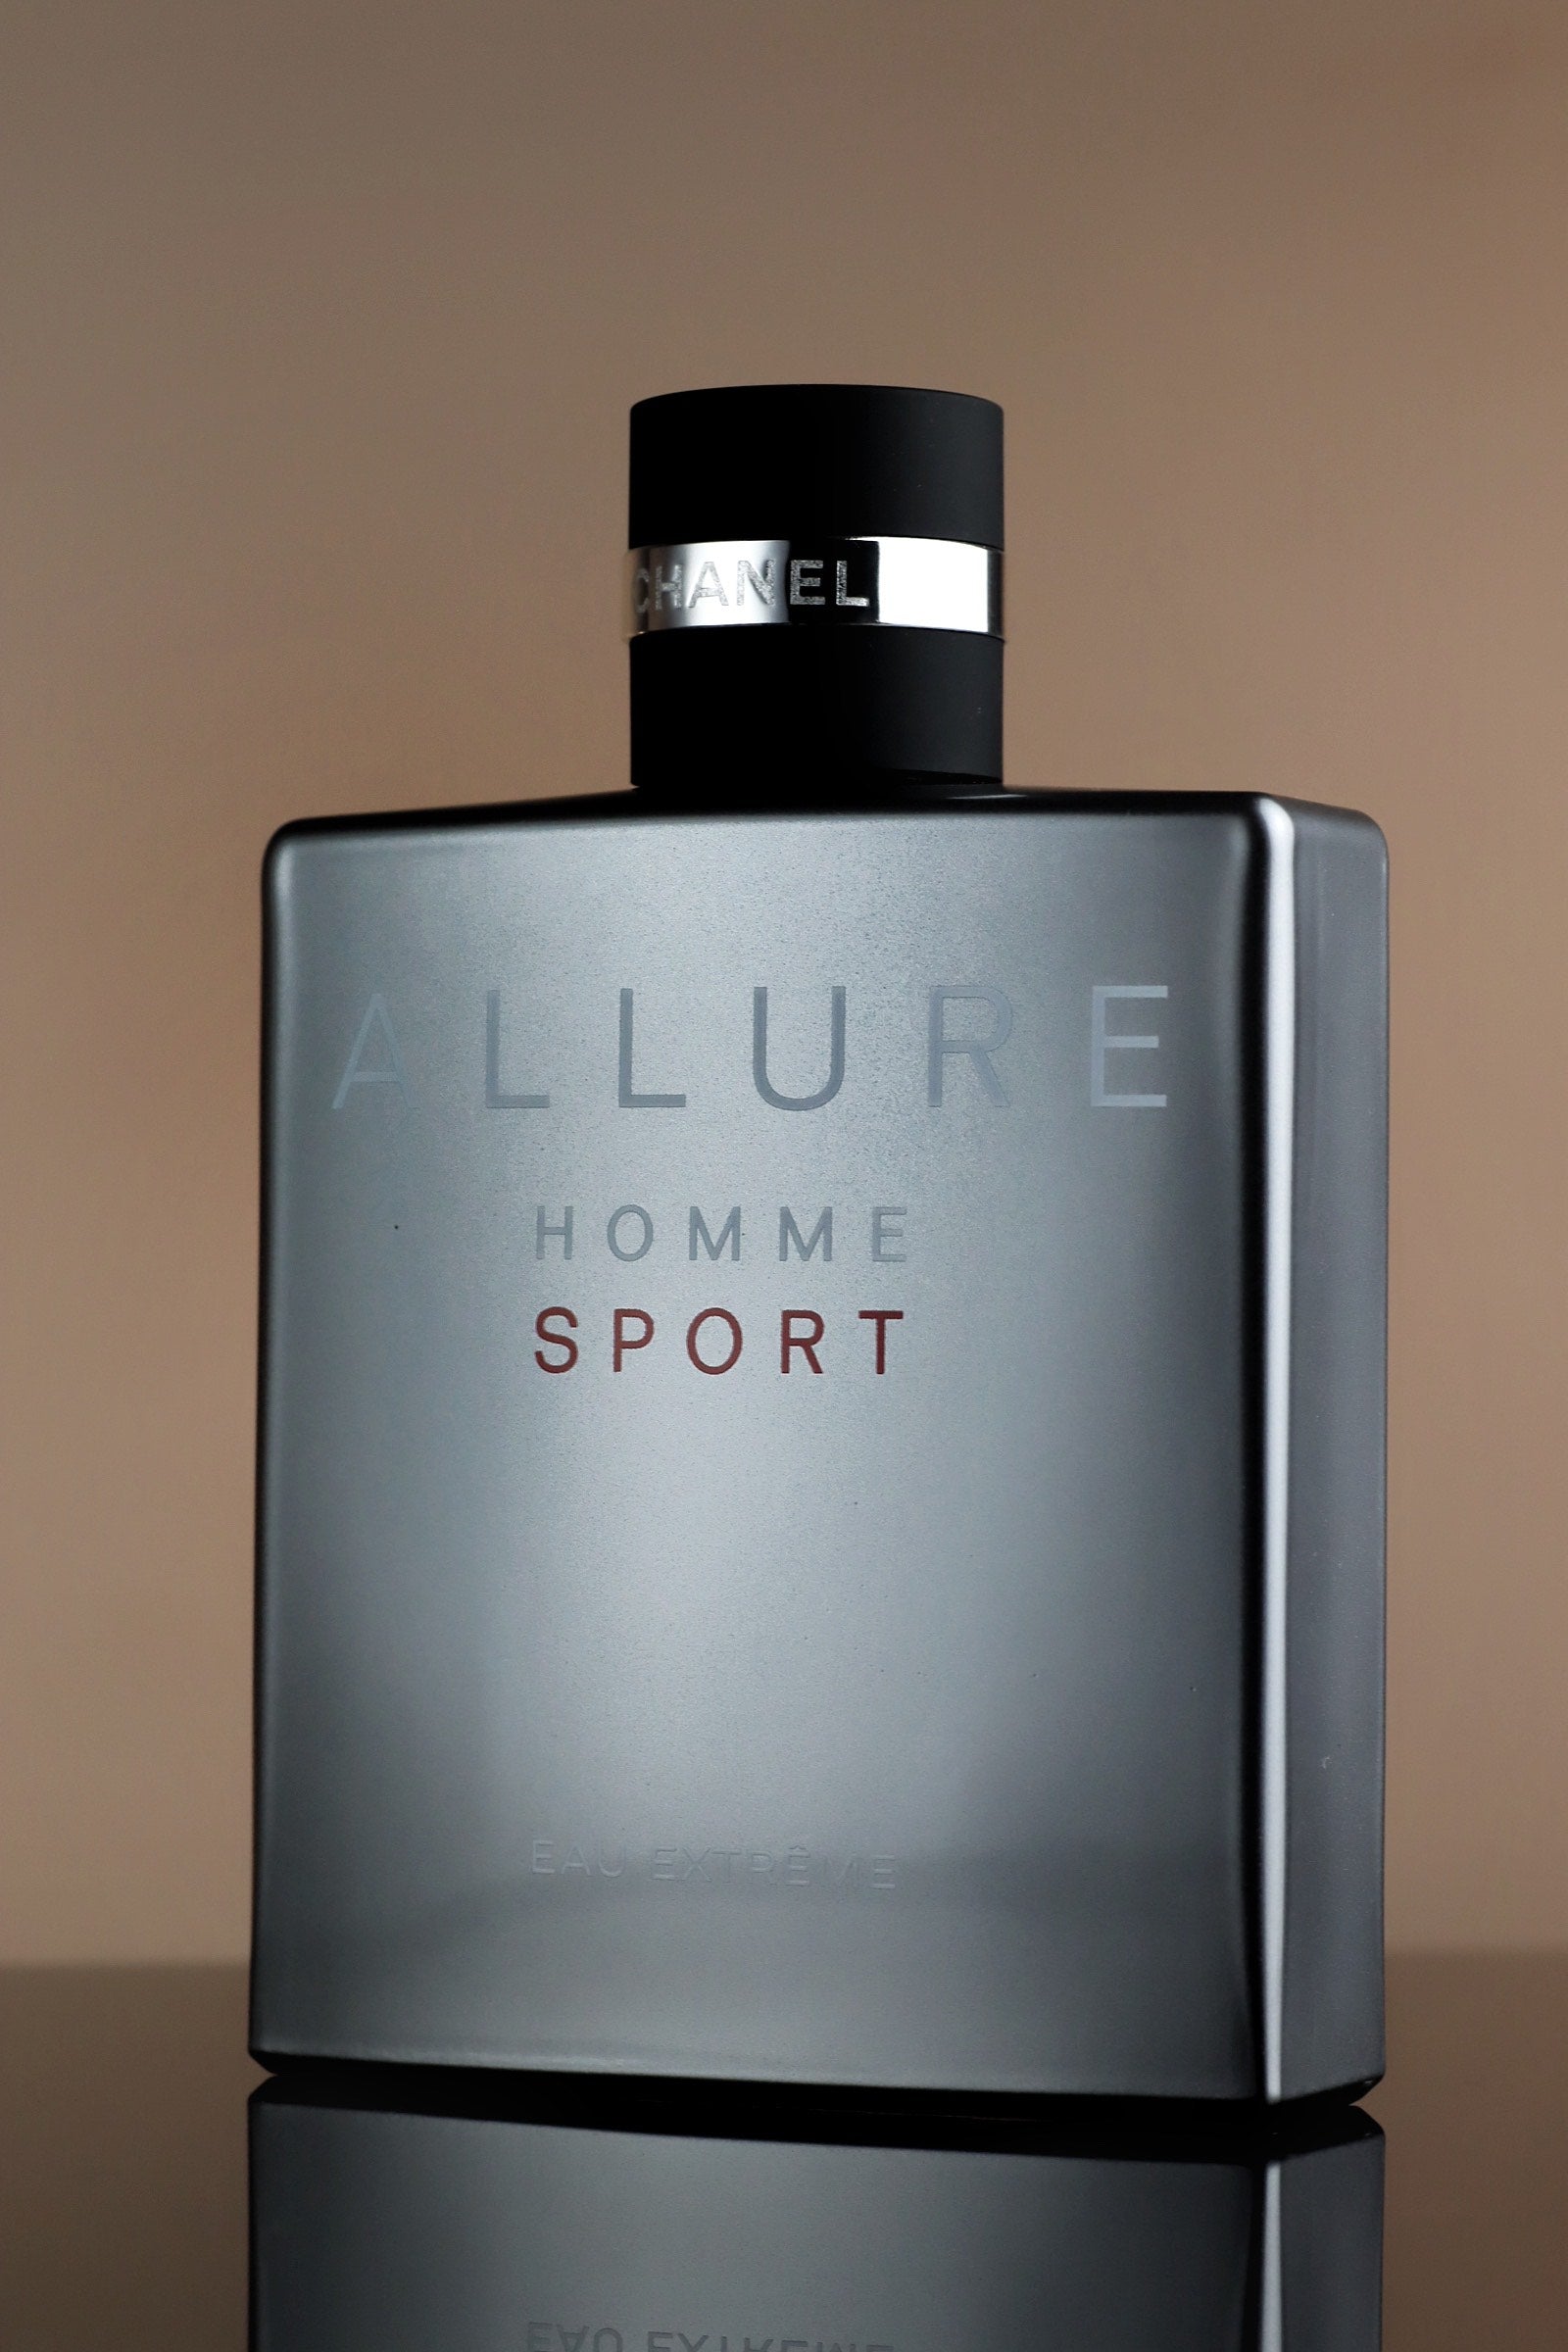 M005 Eau de Parfum For Men Inspired by Allure Homme Sport 2.5 FL. OZ.  Perfume Vegan, Paraben & Phthalate Free Never Tested on Animals Size